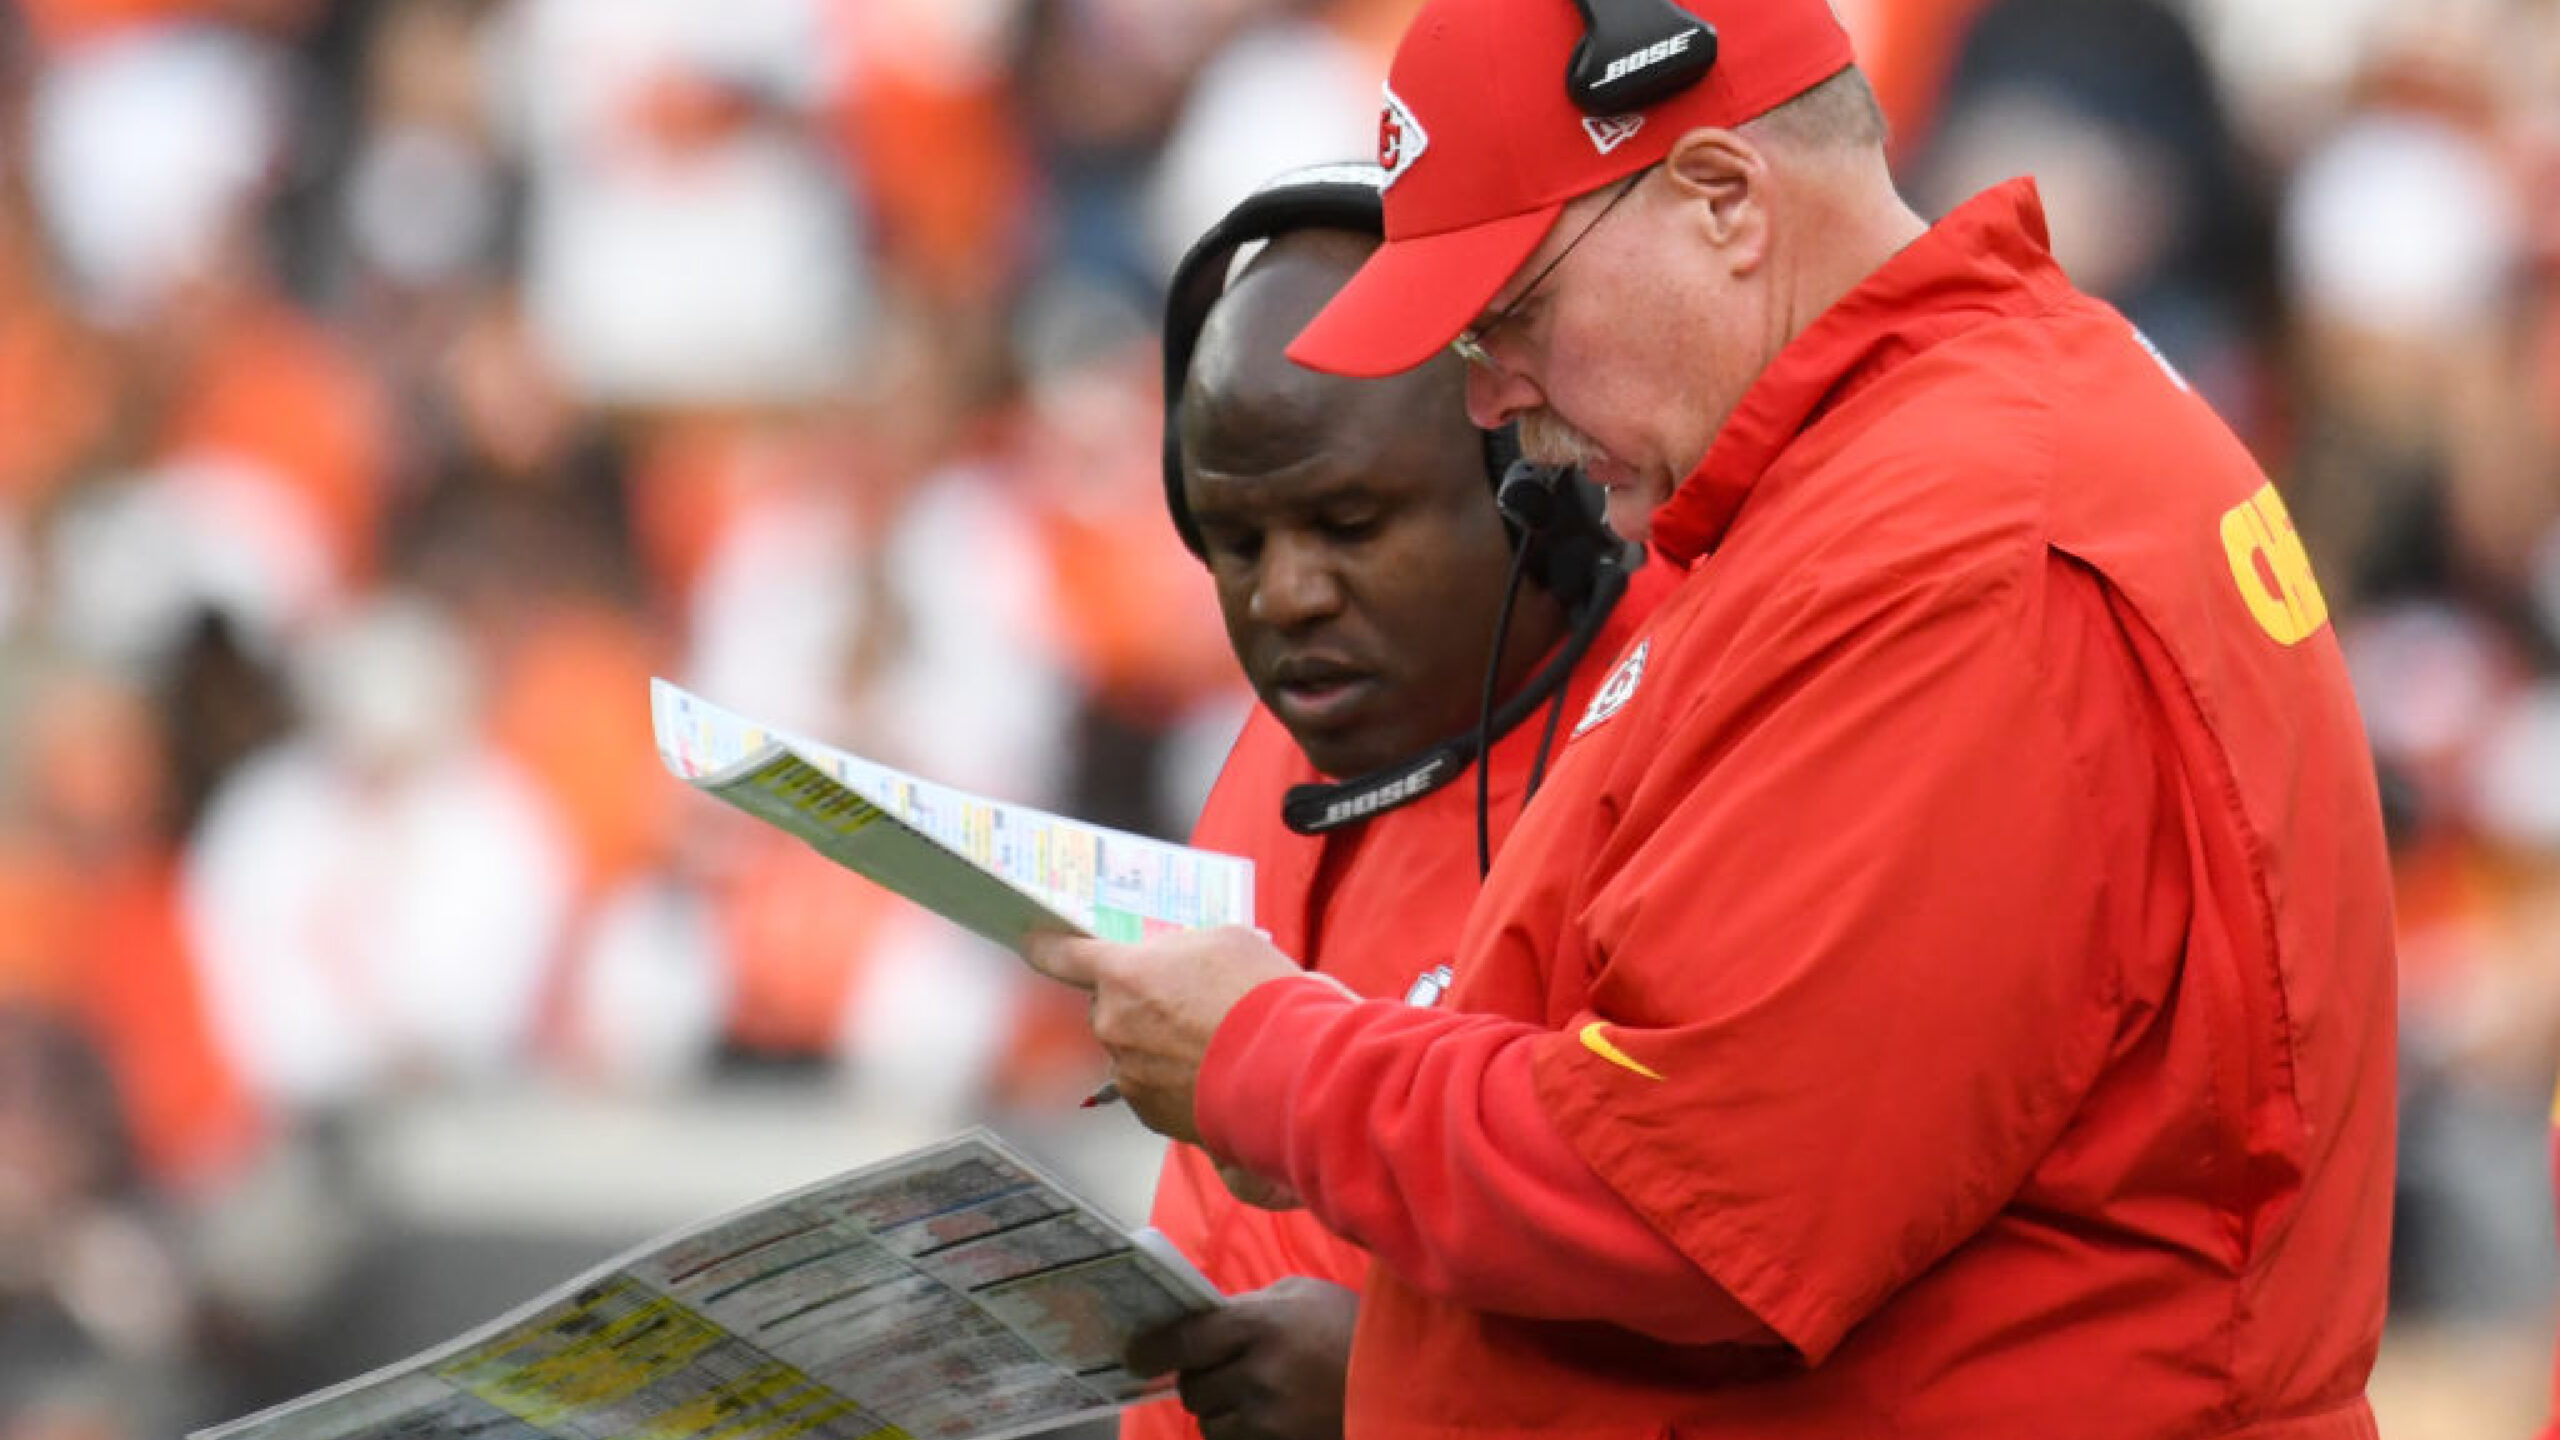 CLEVELAND, OH - NOVEMBER 4, 2018: Head coach Andy Reid and offensive coordinator Eric Bieniemy of the Kansas City Chiefs talk on the sideline in the fourth quarter of a game against the Cleveland Browns on November 4, 2018 at FirstEnergy Stadium in Cleveland, Ohio. Kansas City won 37-21. (Photo by: 2018 Nick Cammett/Diamond Images/Getty Images)